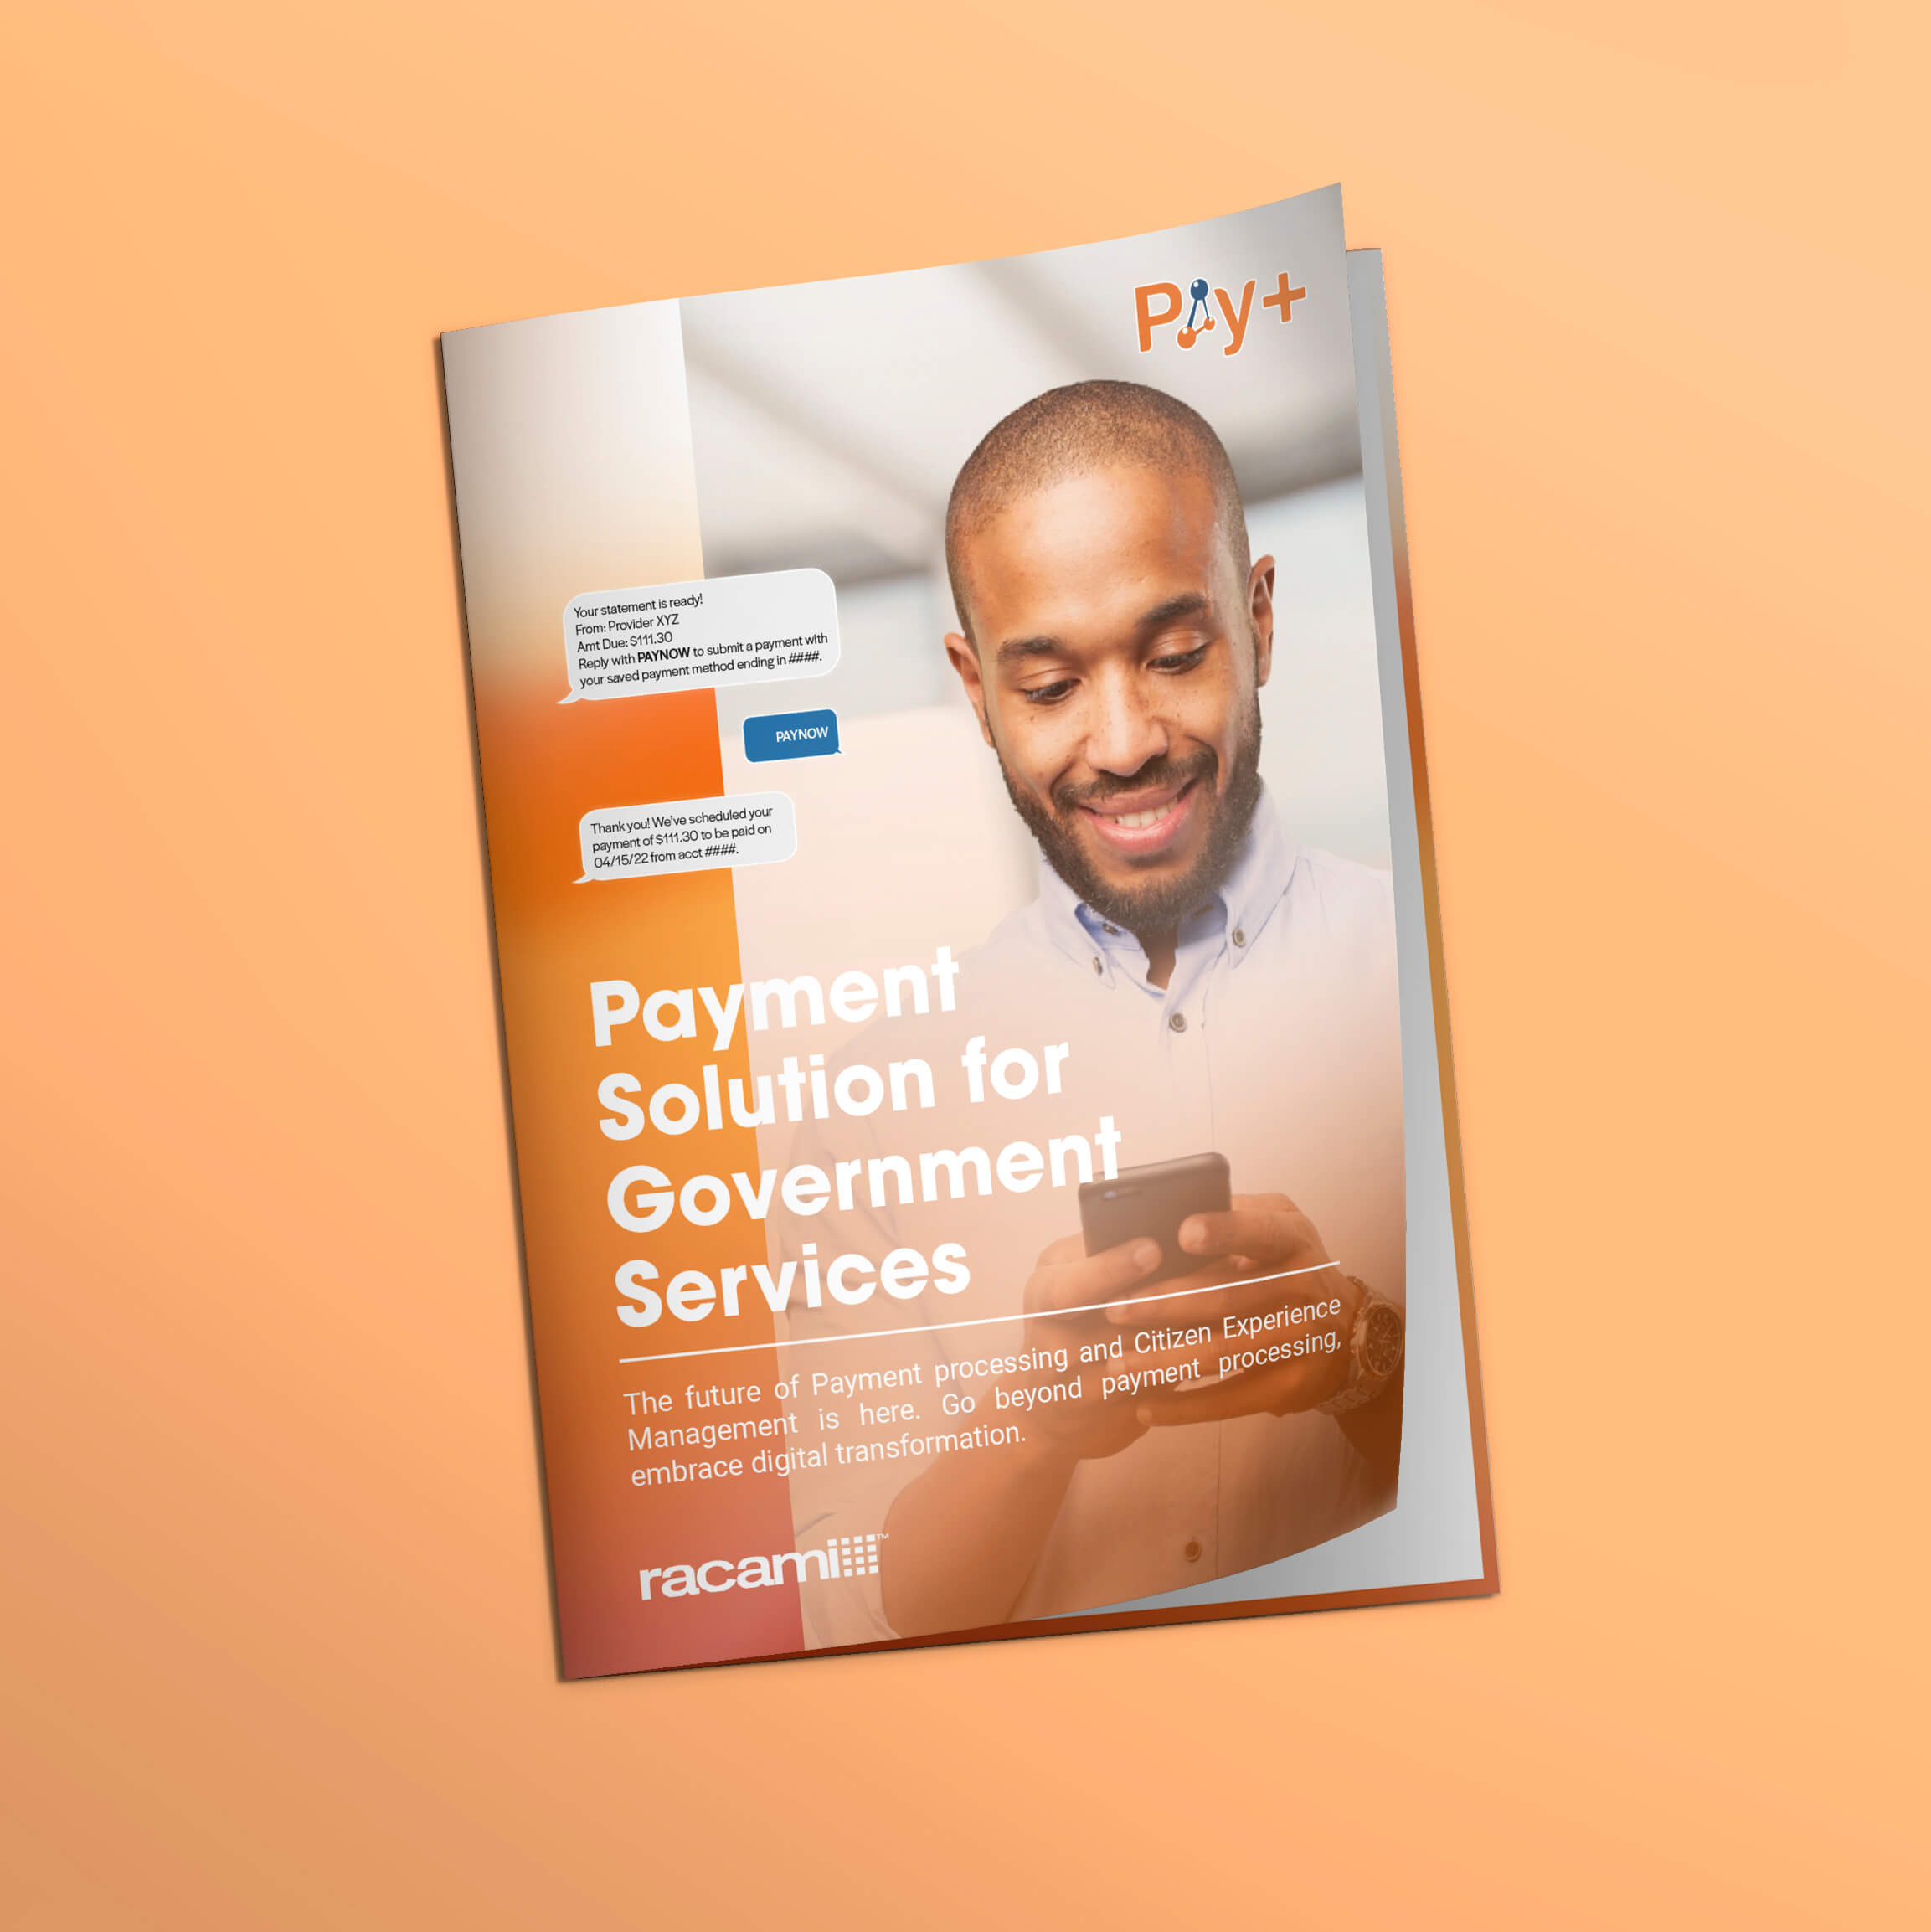 Pay+ for Governments